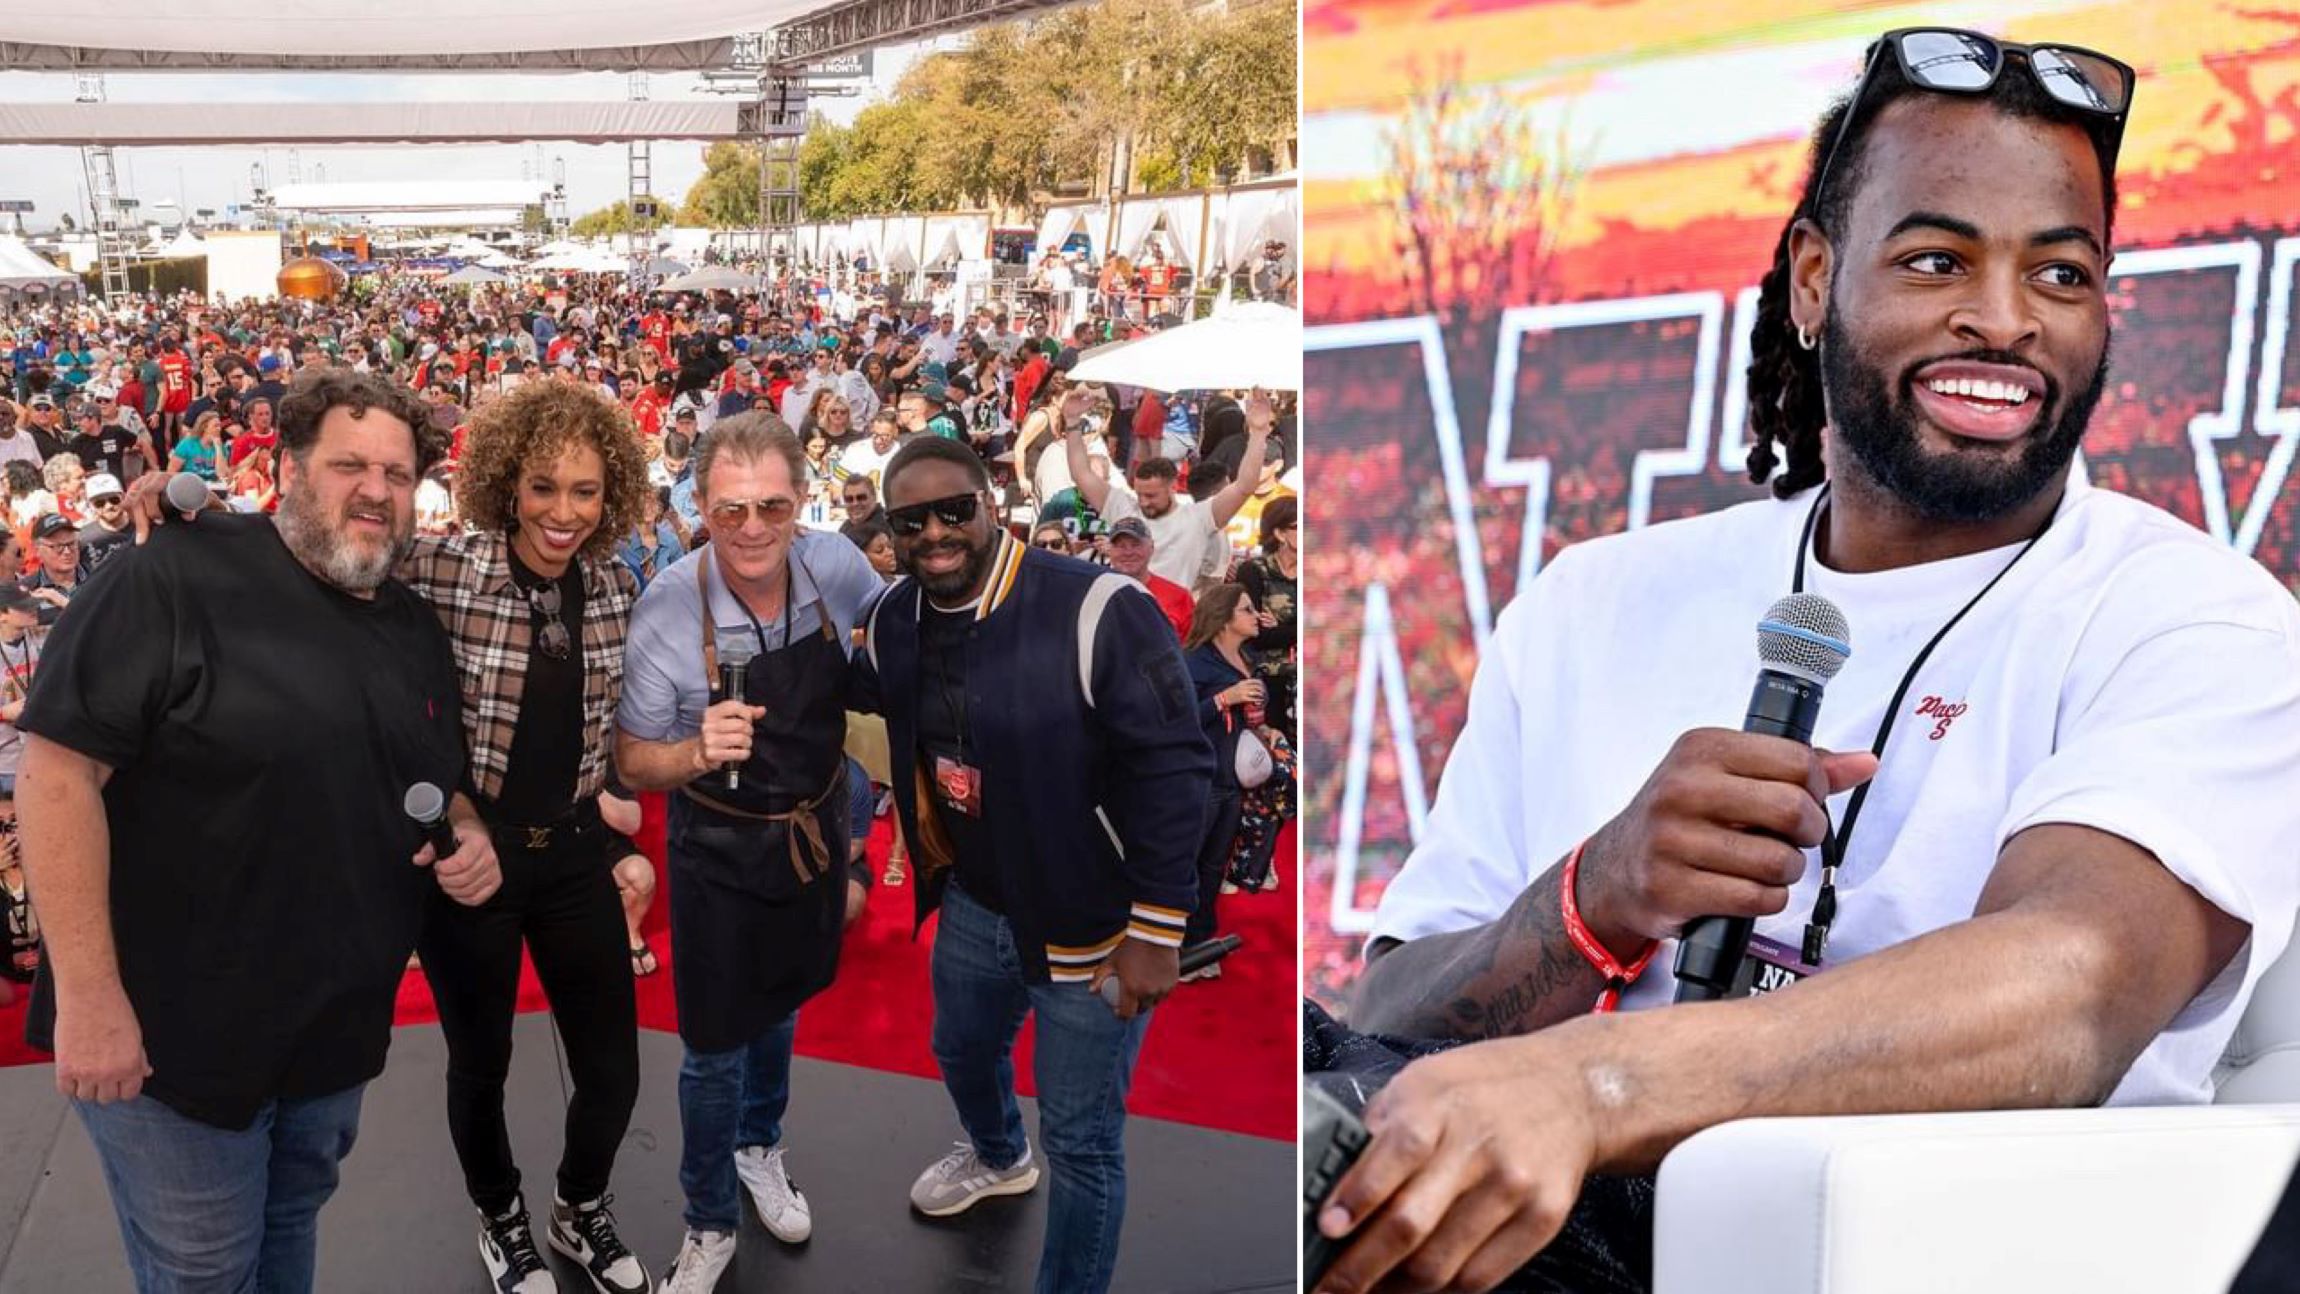 Two images, on the left is Bobby Flay with three others, and on the right is Najee Harris. Both are from the Bullseye Event Group Player's Tailgate. This year's Chiefs 49ers Players Tailgate will be bigger and better!